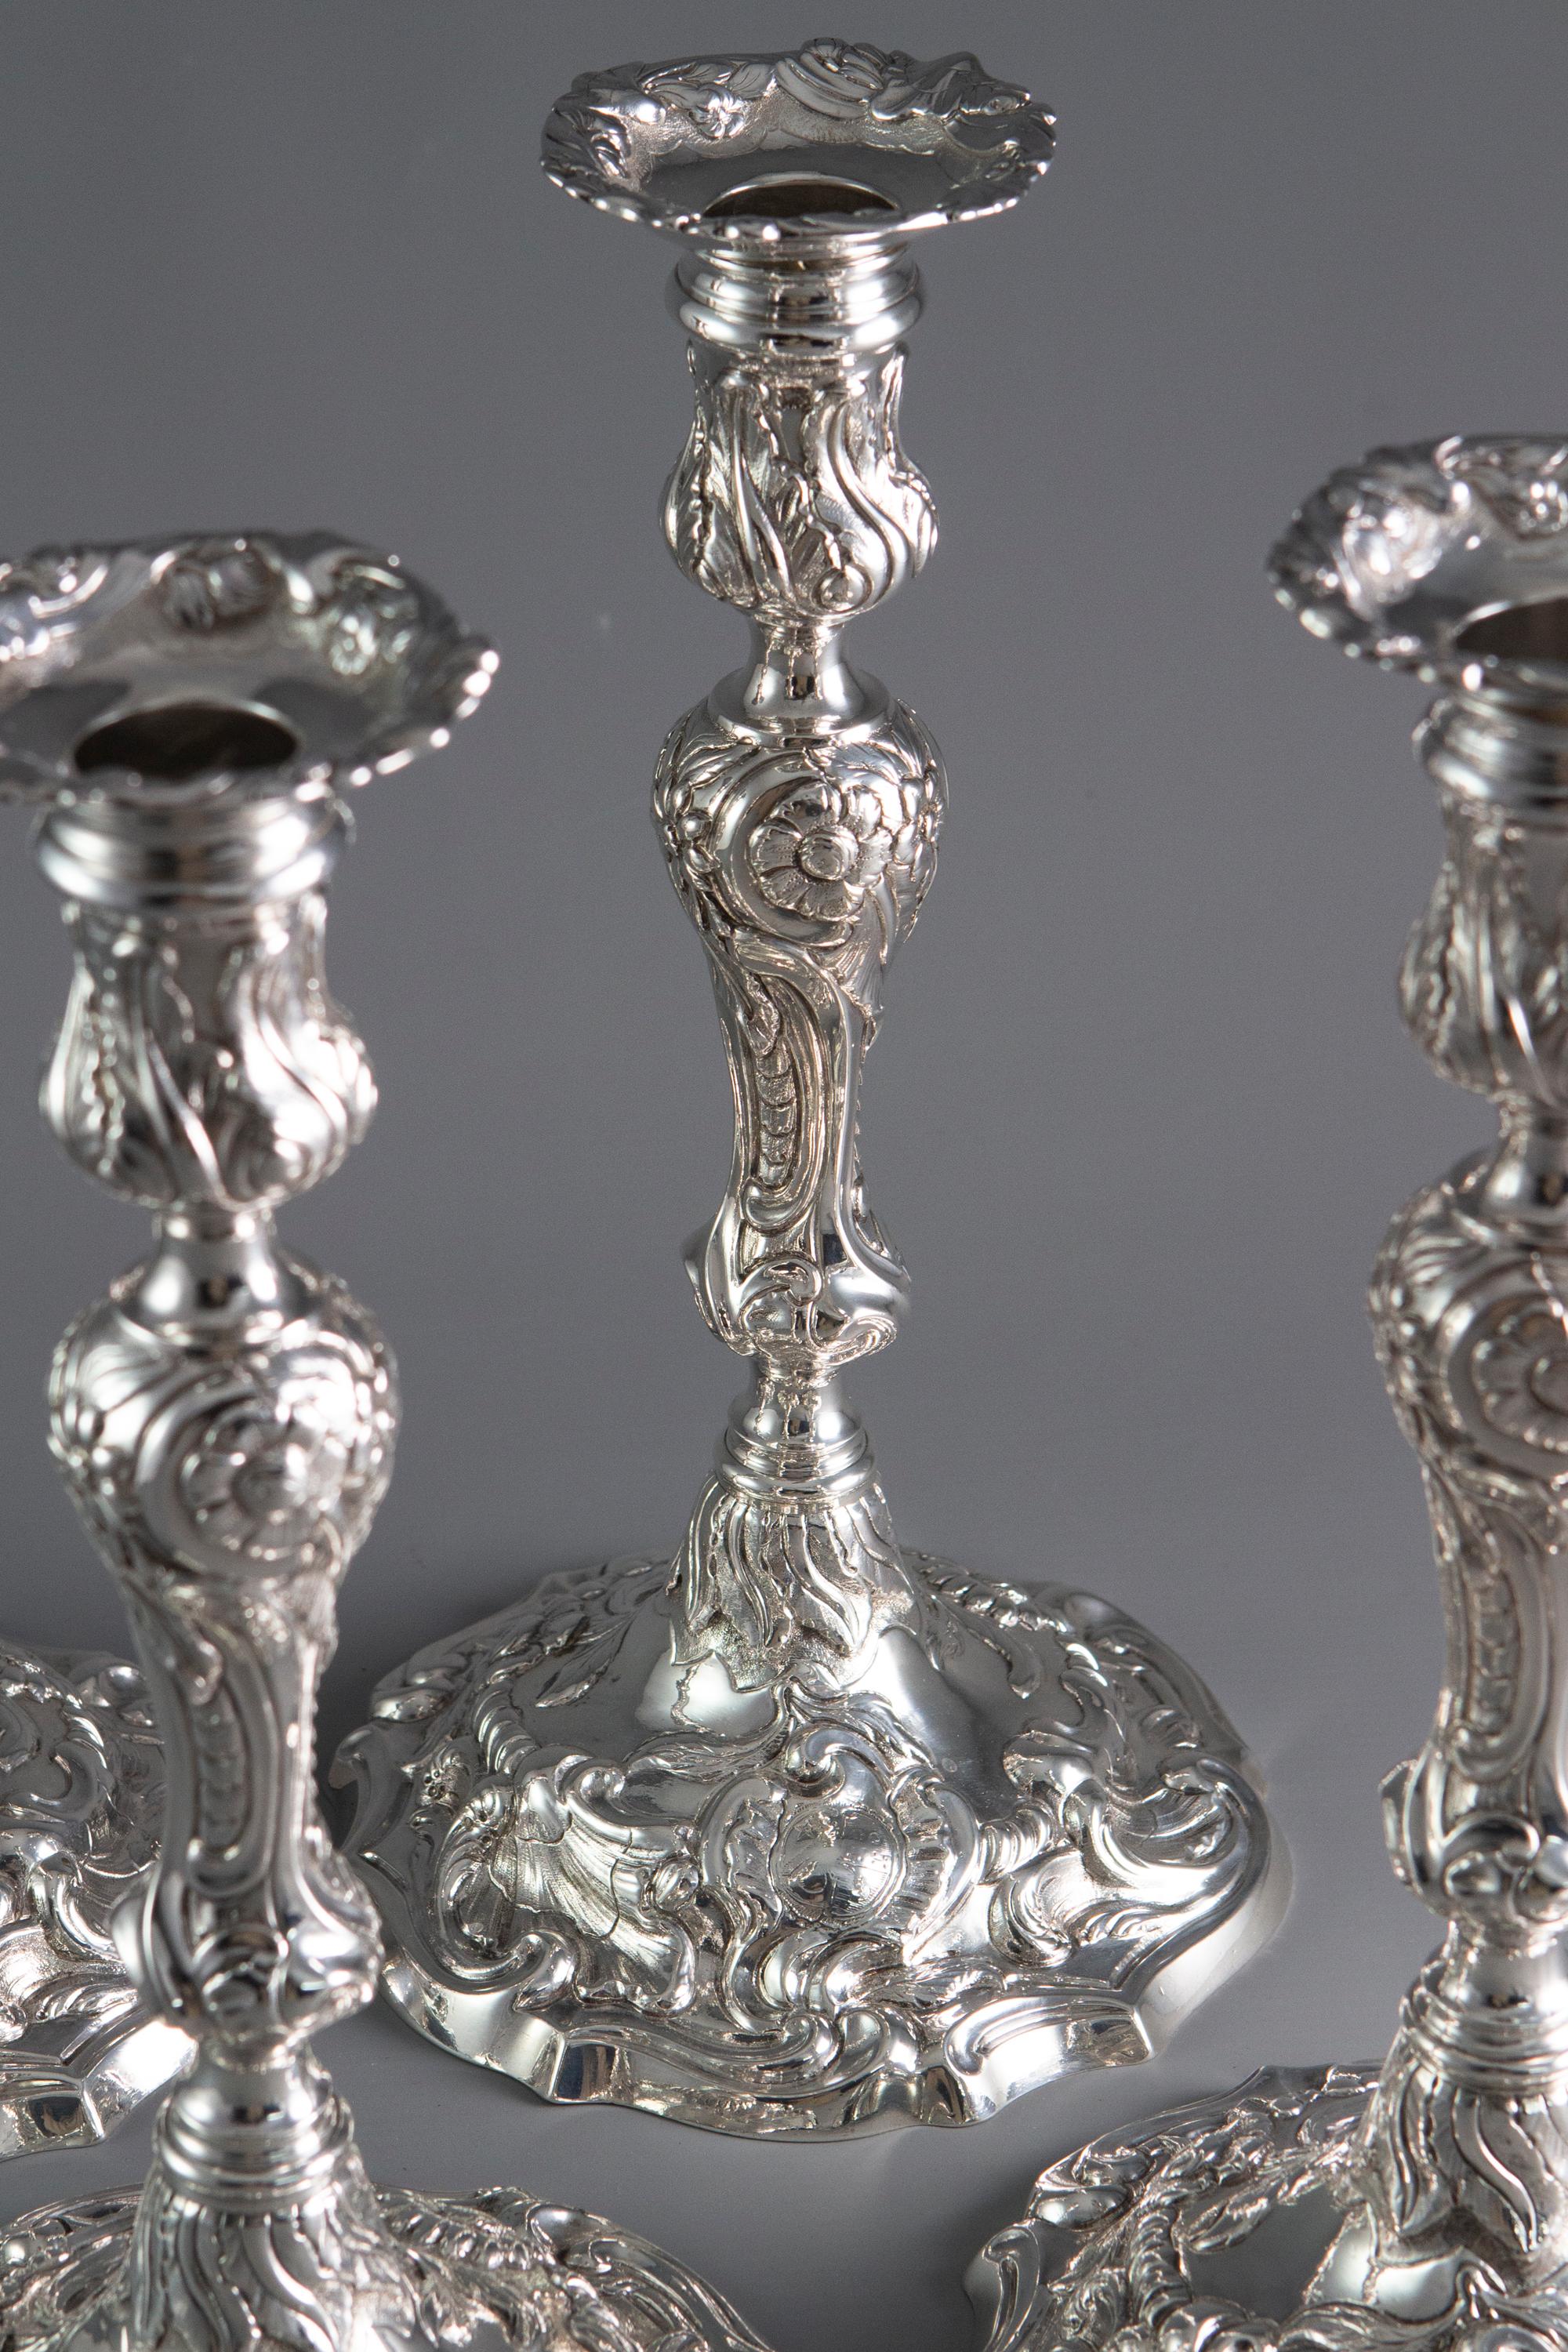 Mid-18th Century A Set of 4 George II Cast Silver Candlesticks, London 1753 by John Cafe